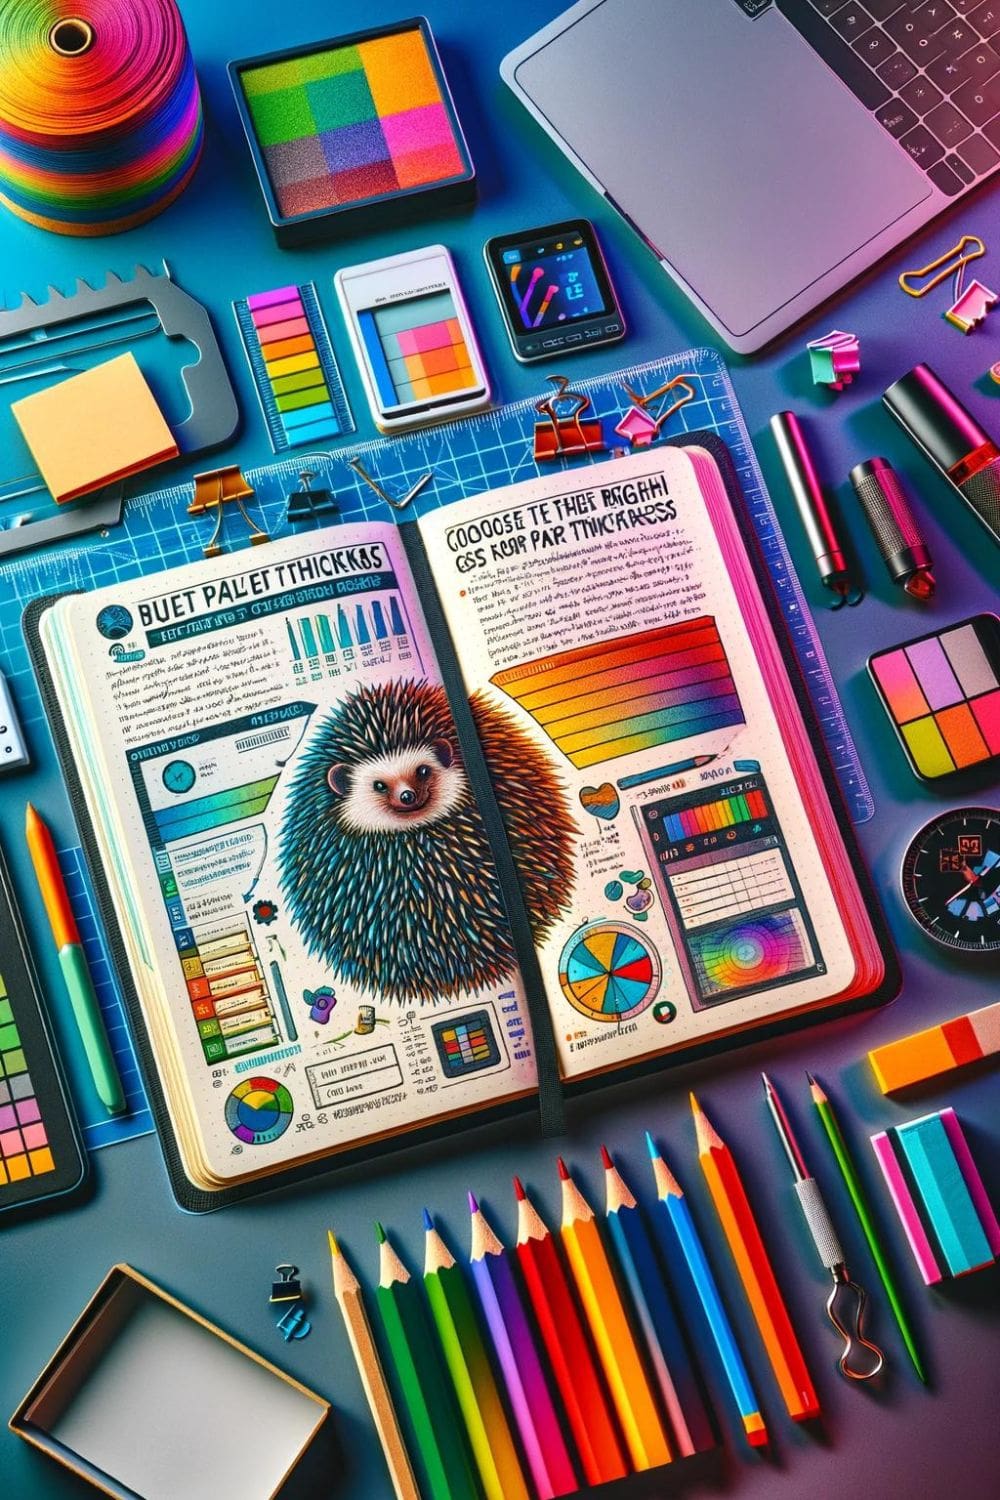 A digital artwork depicting a hedgehog perched atop a book titled "Bullet Journaling" and "The Passionate Palette," surrounded by colorful art supplies.